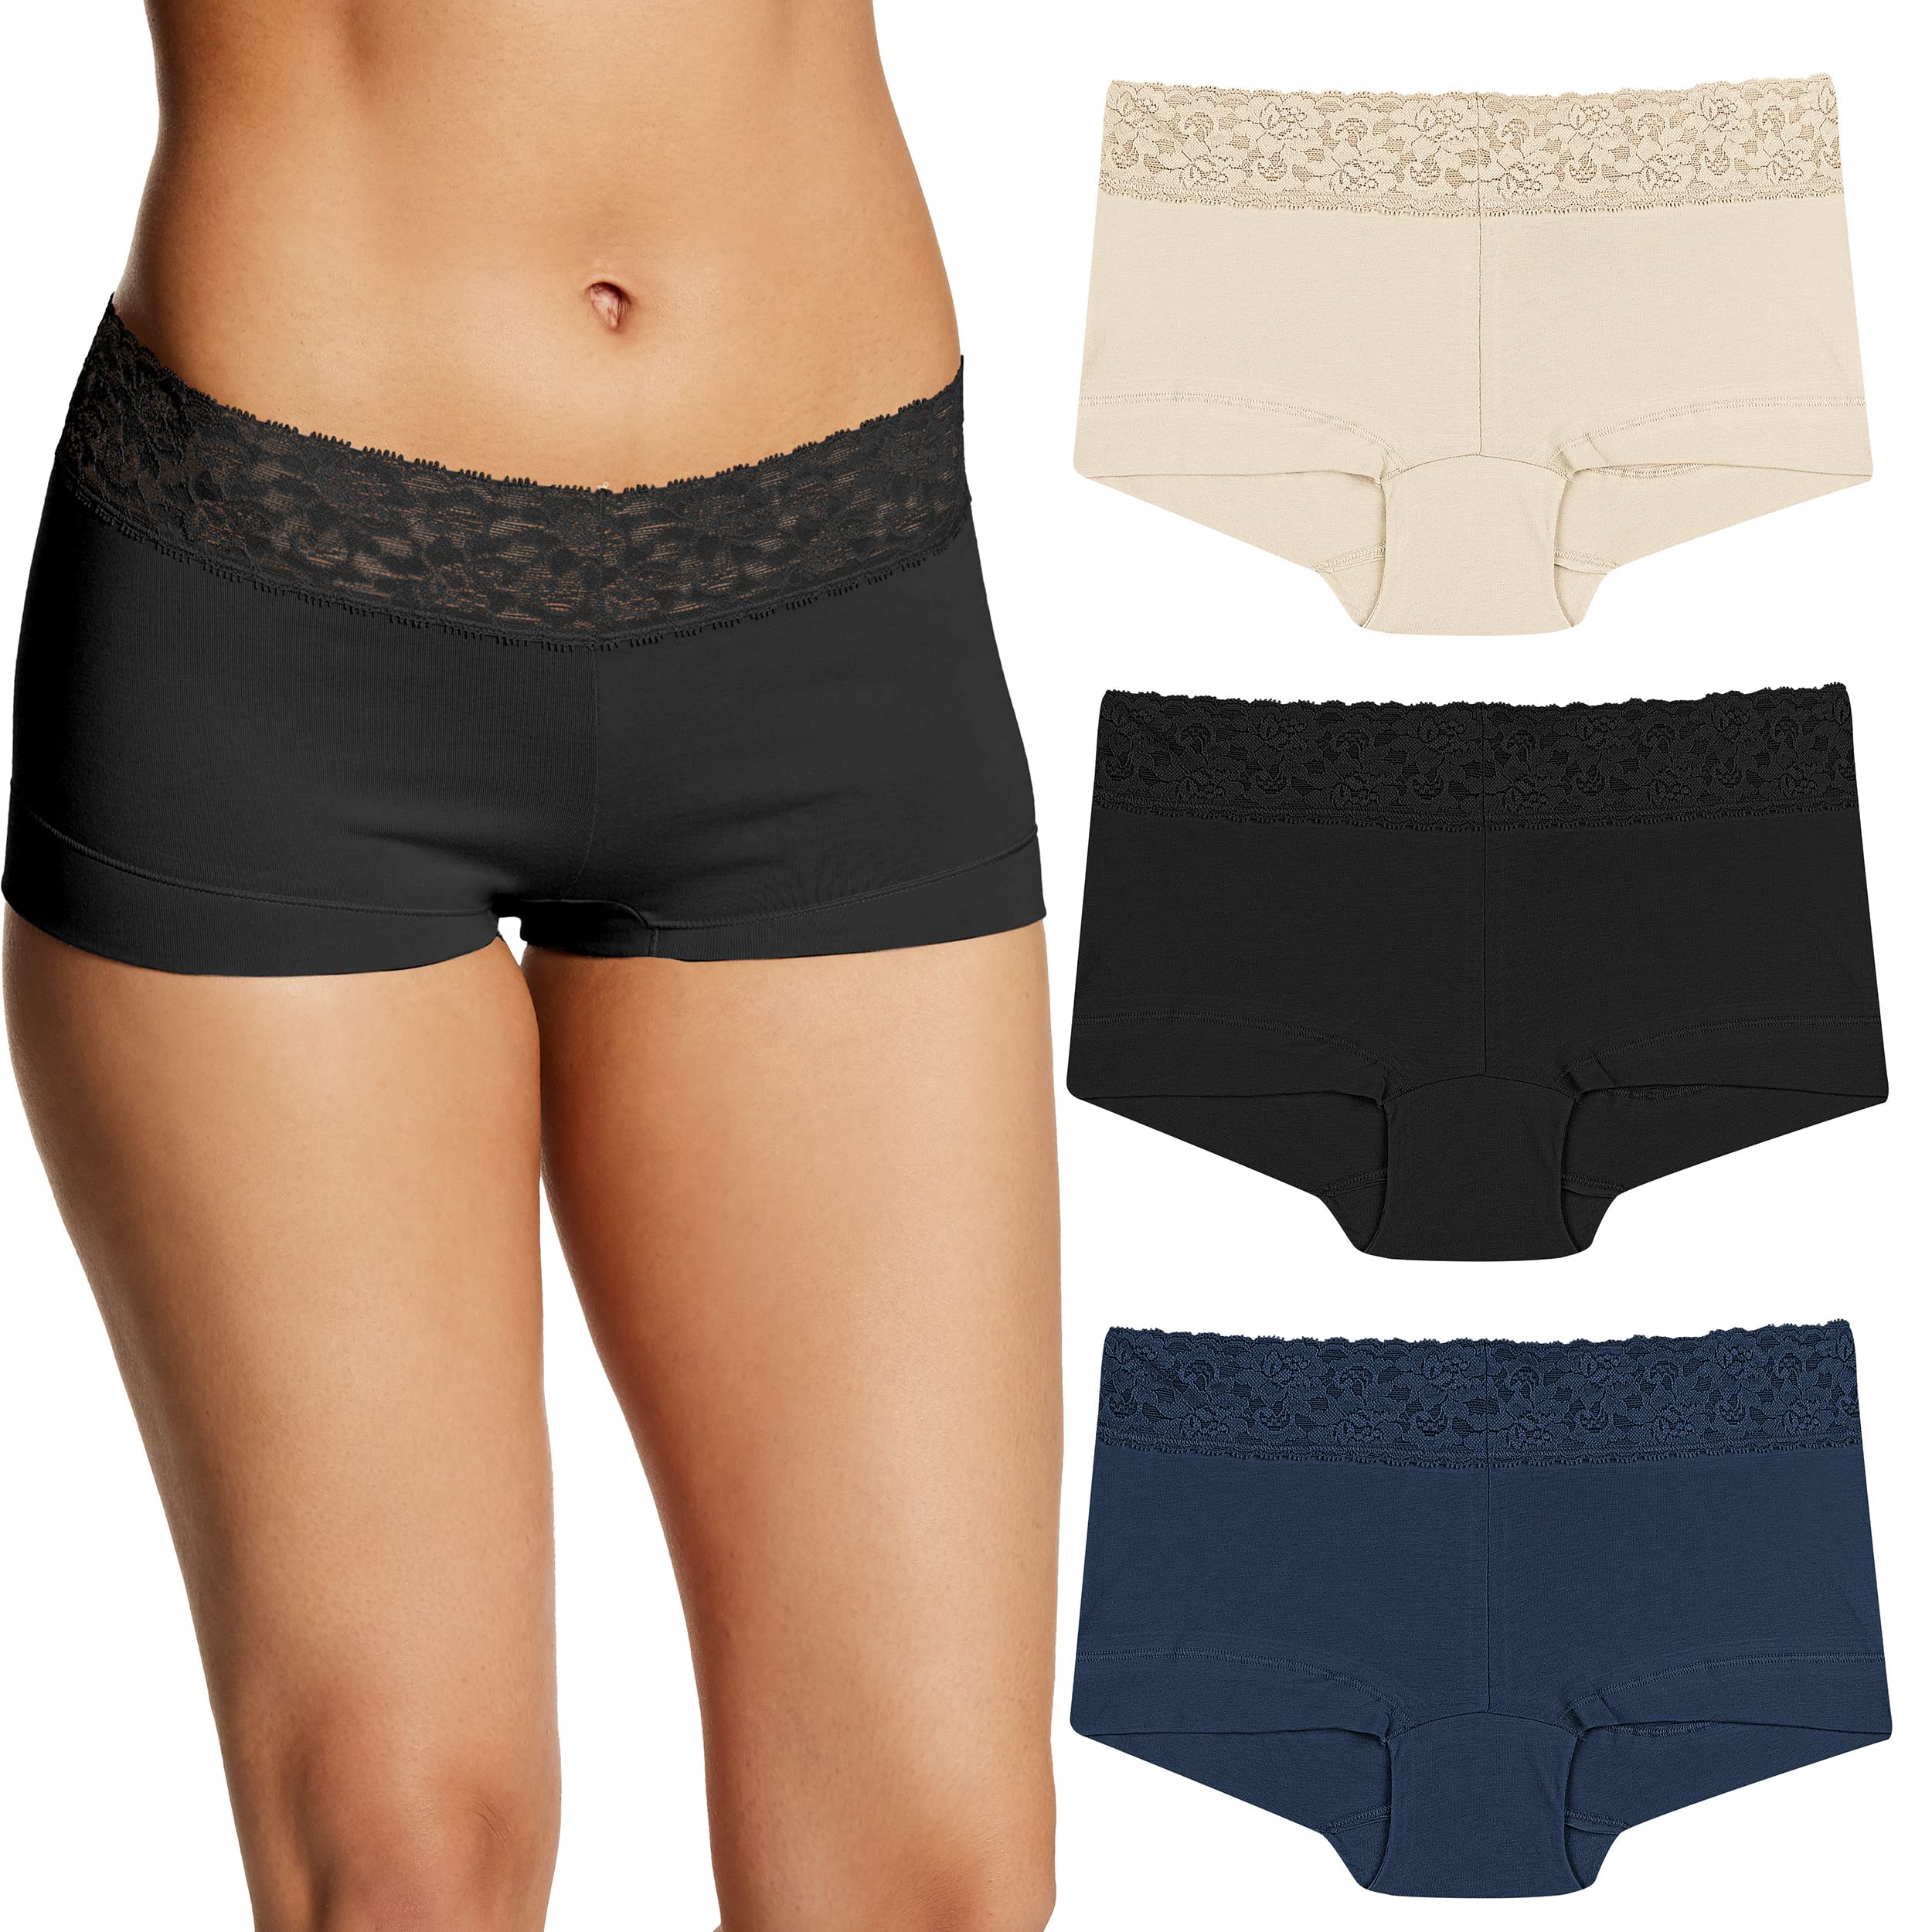 Maidenform Pack, Dream Lace Boyshorts, Cotton Panties for Women, 3-Pack